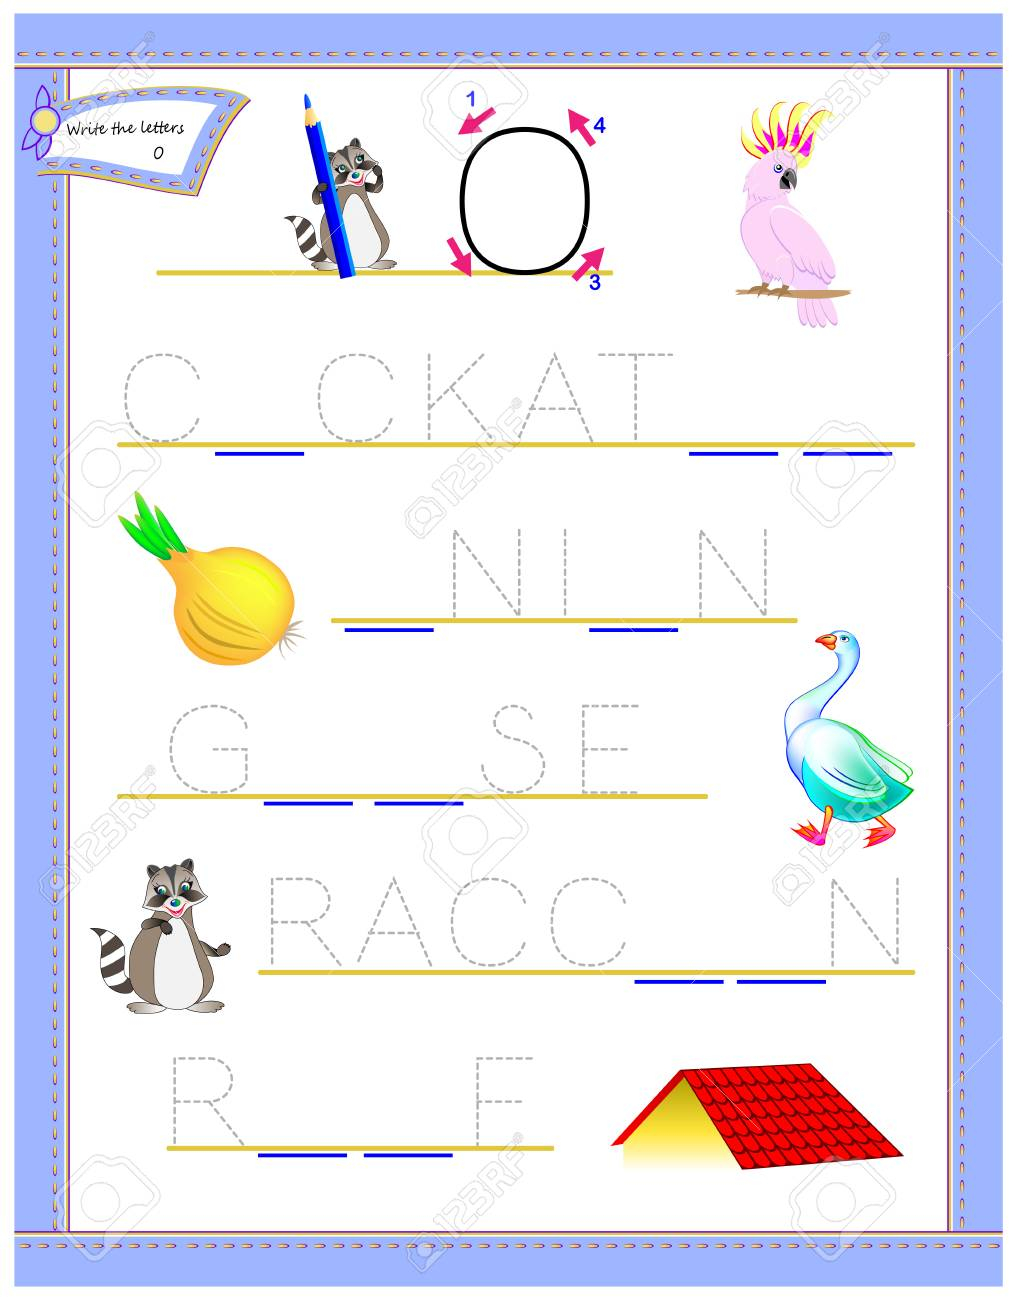 Tracing Letter O For Study English Alphabet. Printable Worksheet..